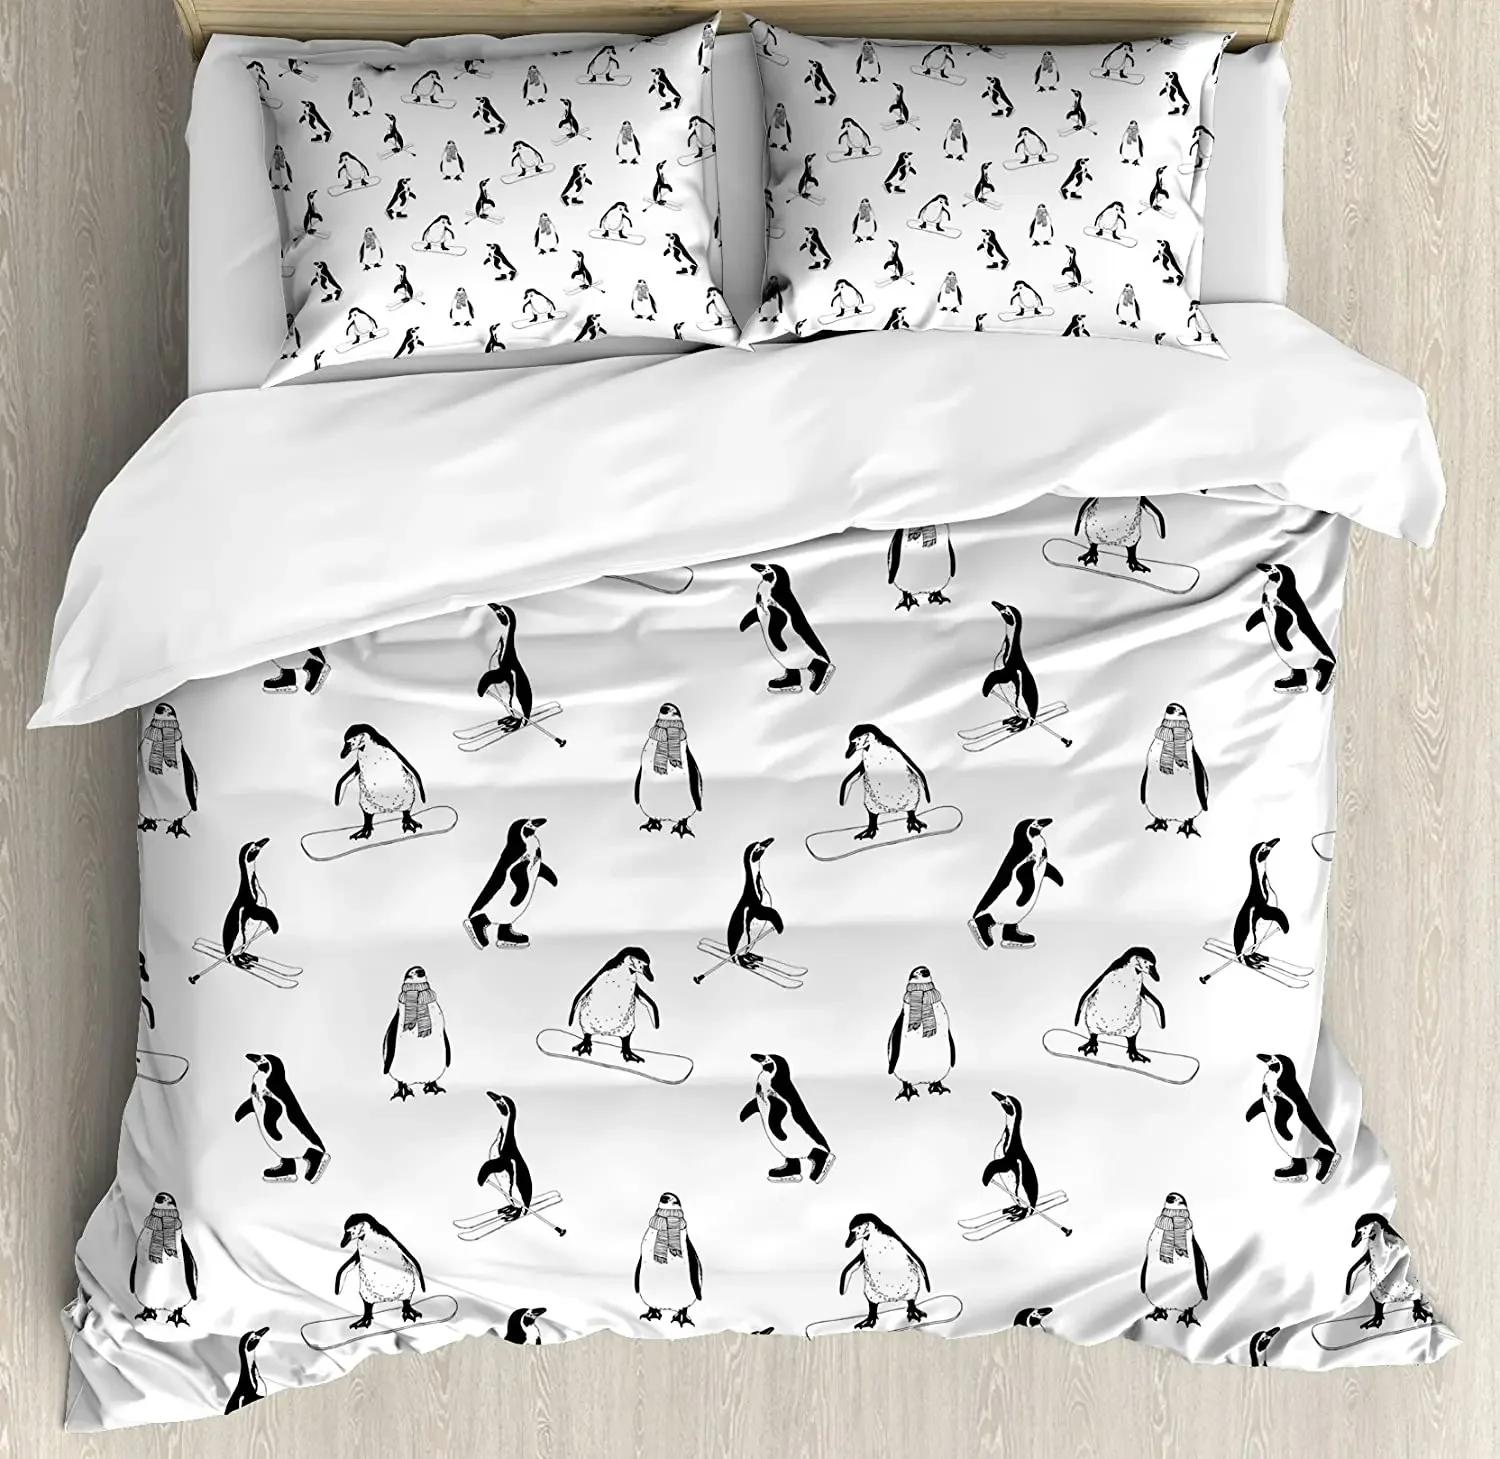 Kids Bedding Set For Bedroom Bed Home Skiing Penguins on Snowboards Winter Sports Themed P Duvet Cover Quilt Cover P